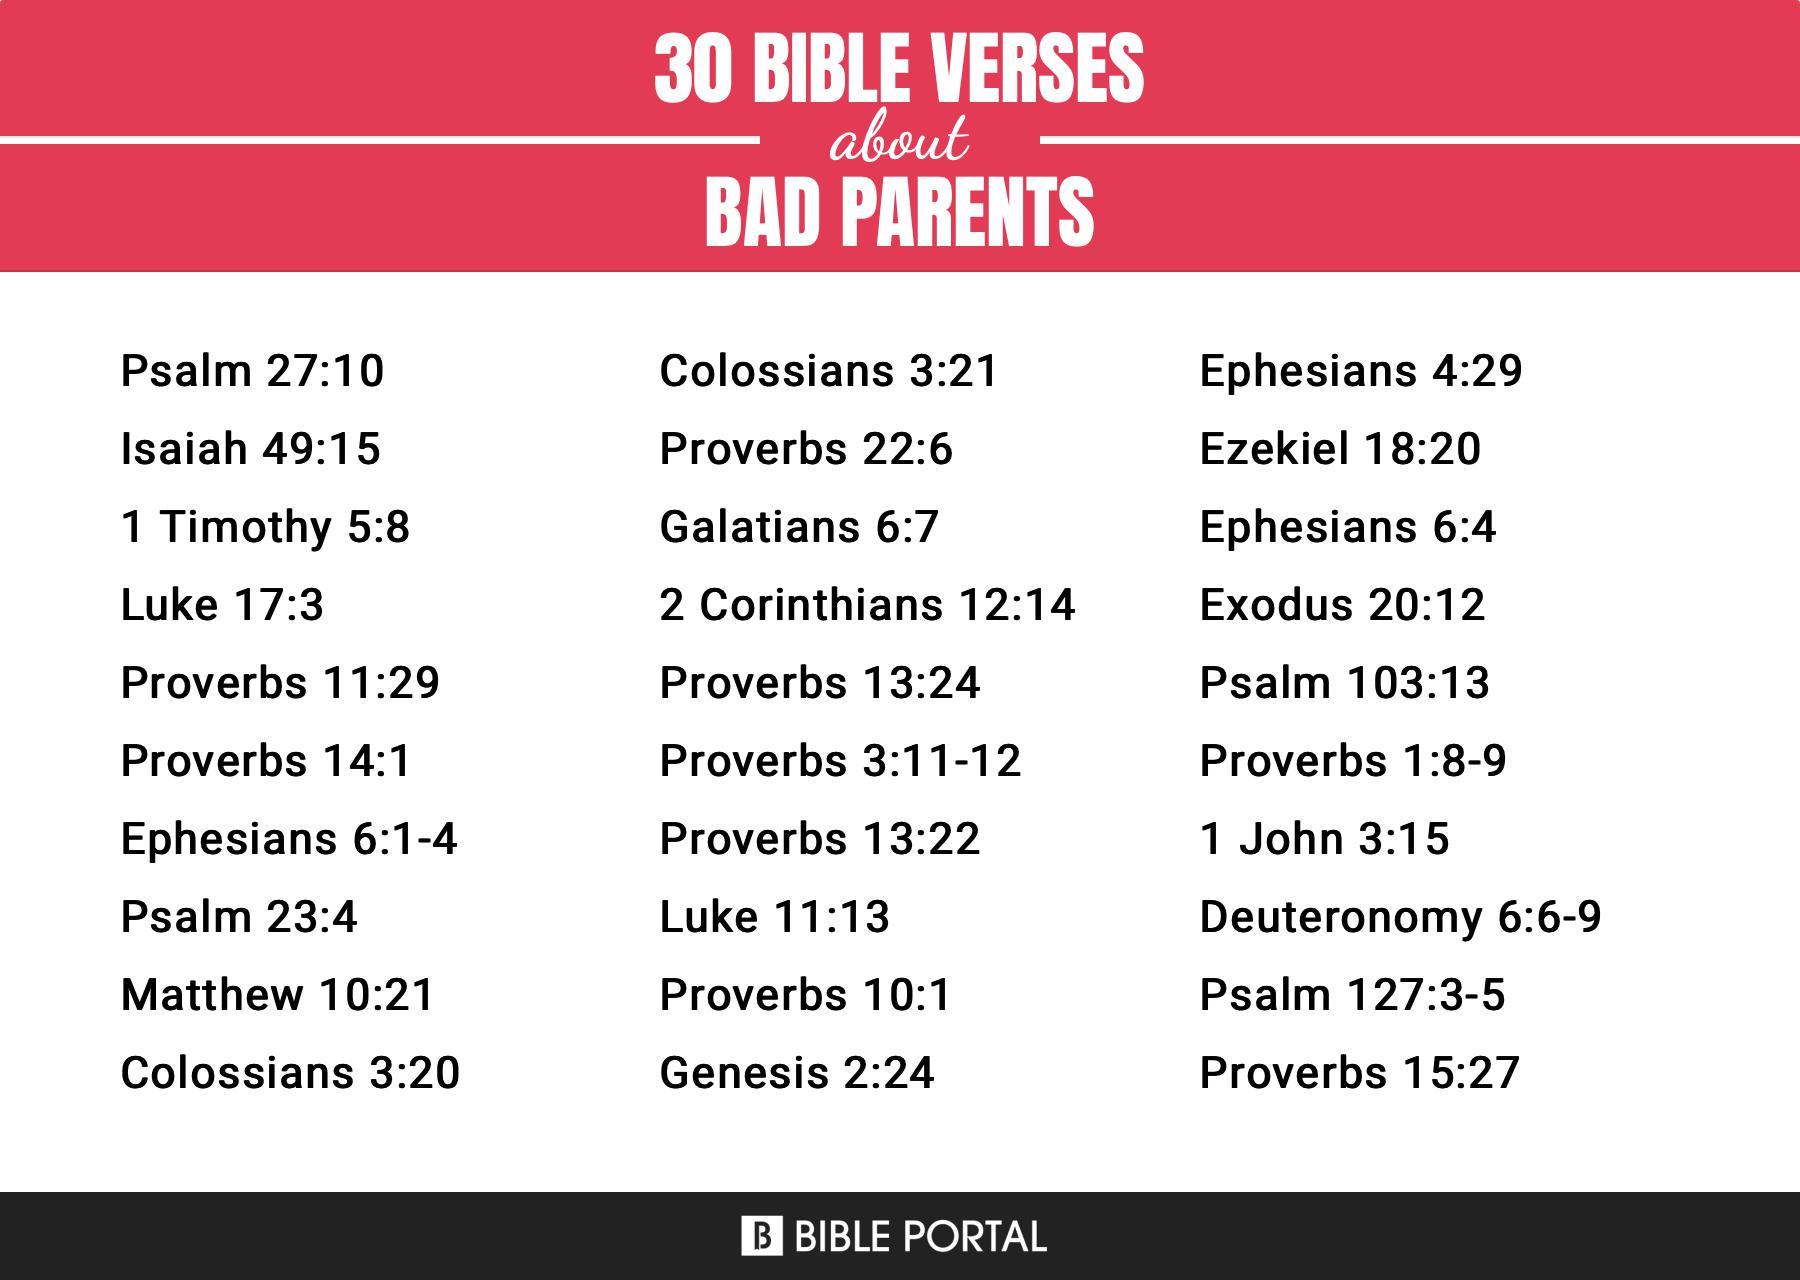 What Does the Bible Say about Bad Parents?